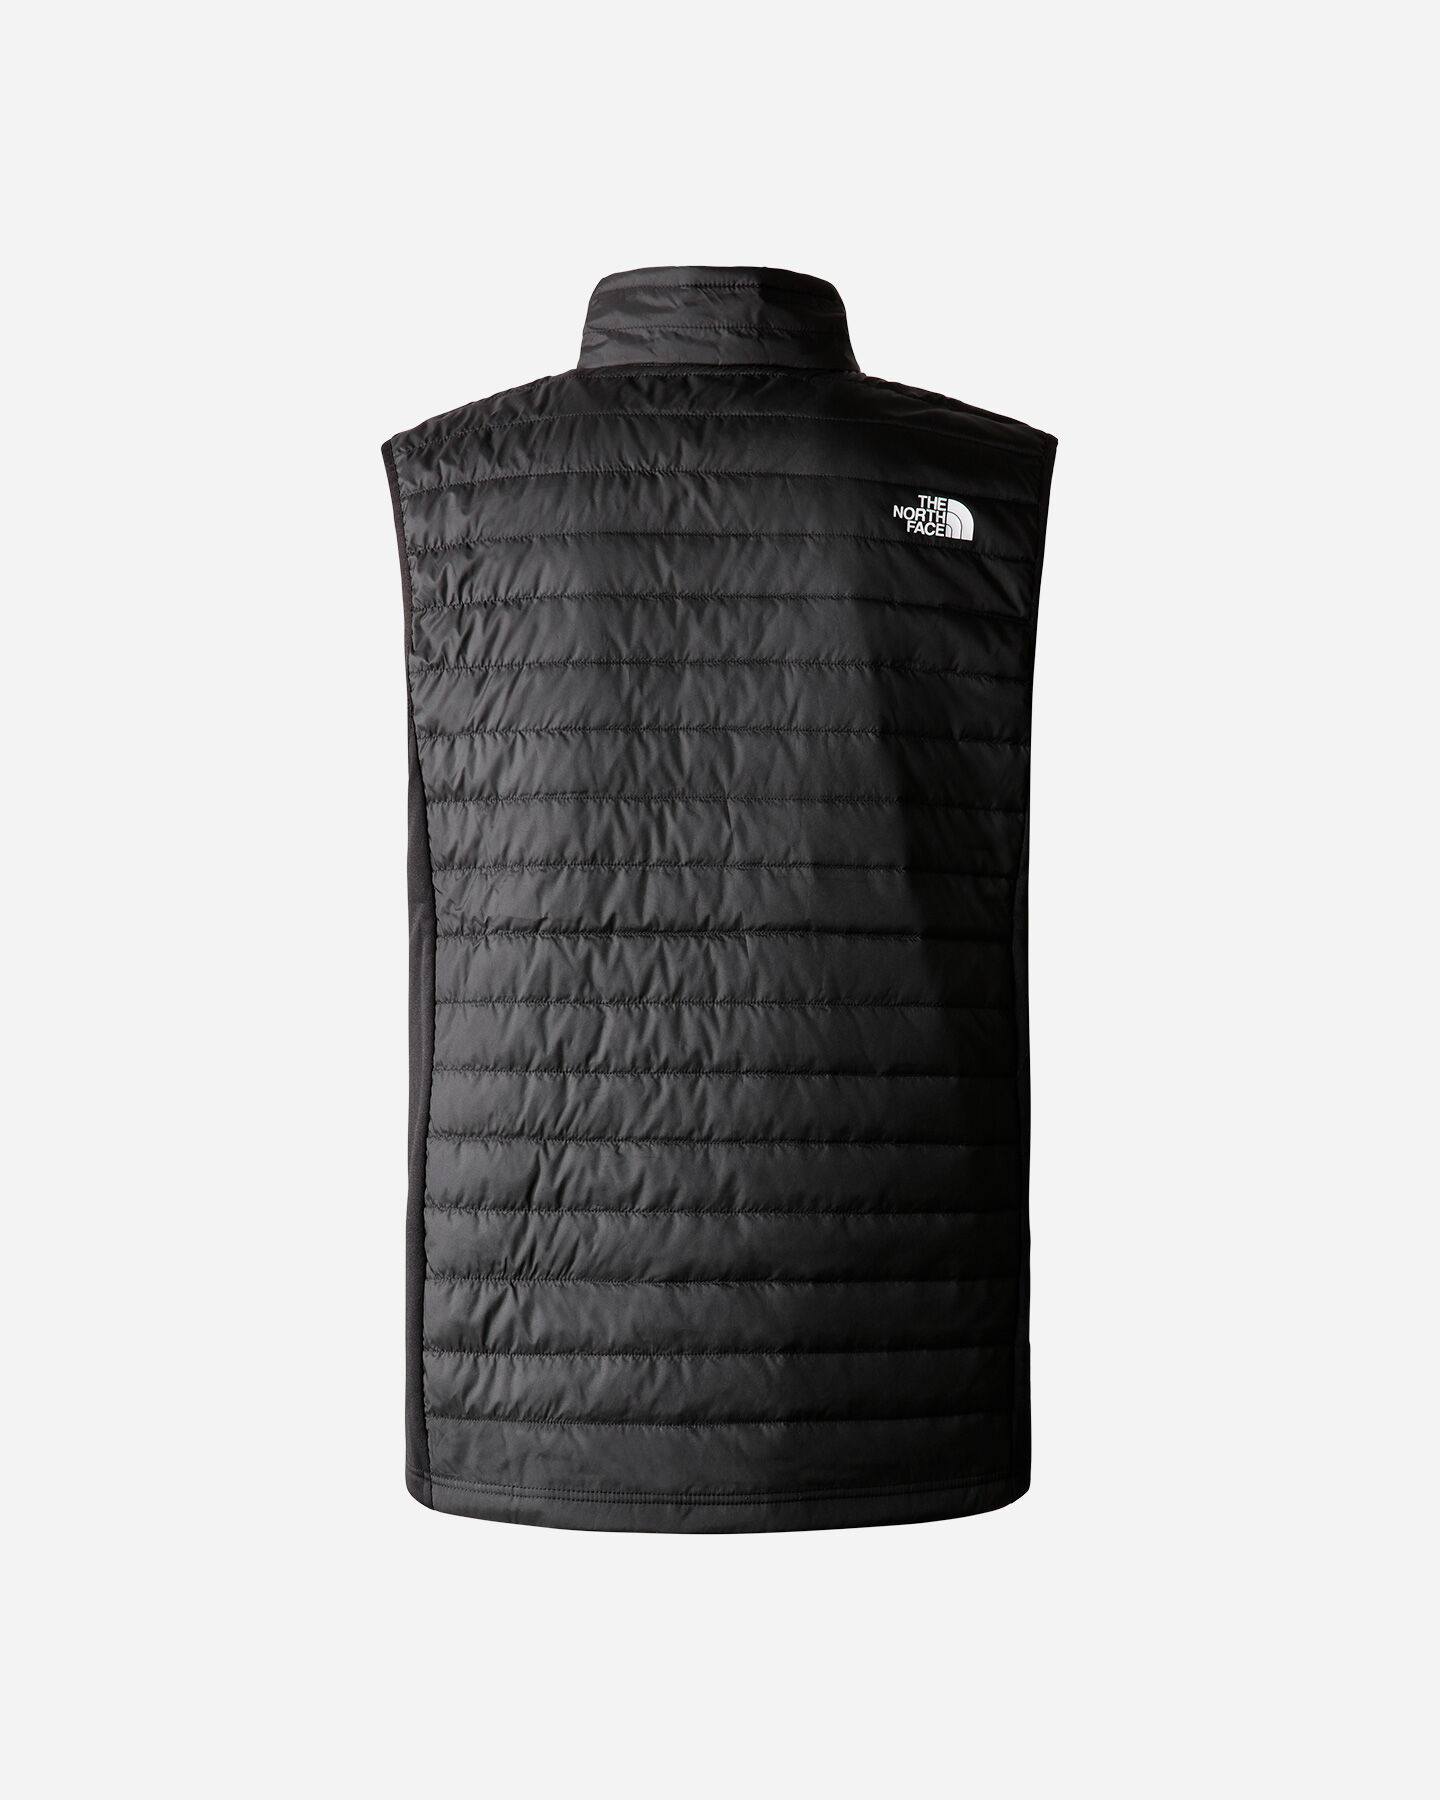  Gilet THE NORTH FACE CANYONLANDS HYBRID M S5475286|JK3|L scatto 1